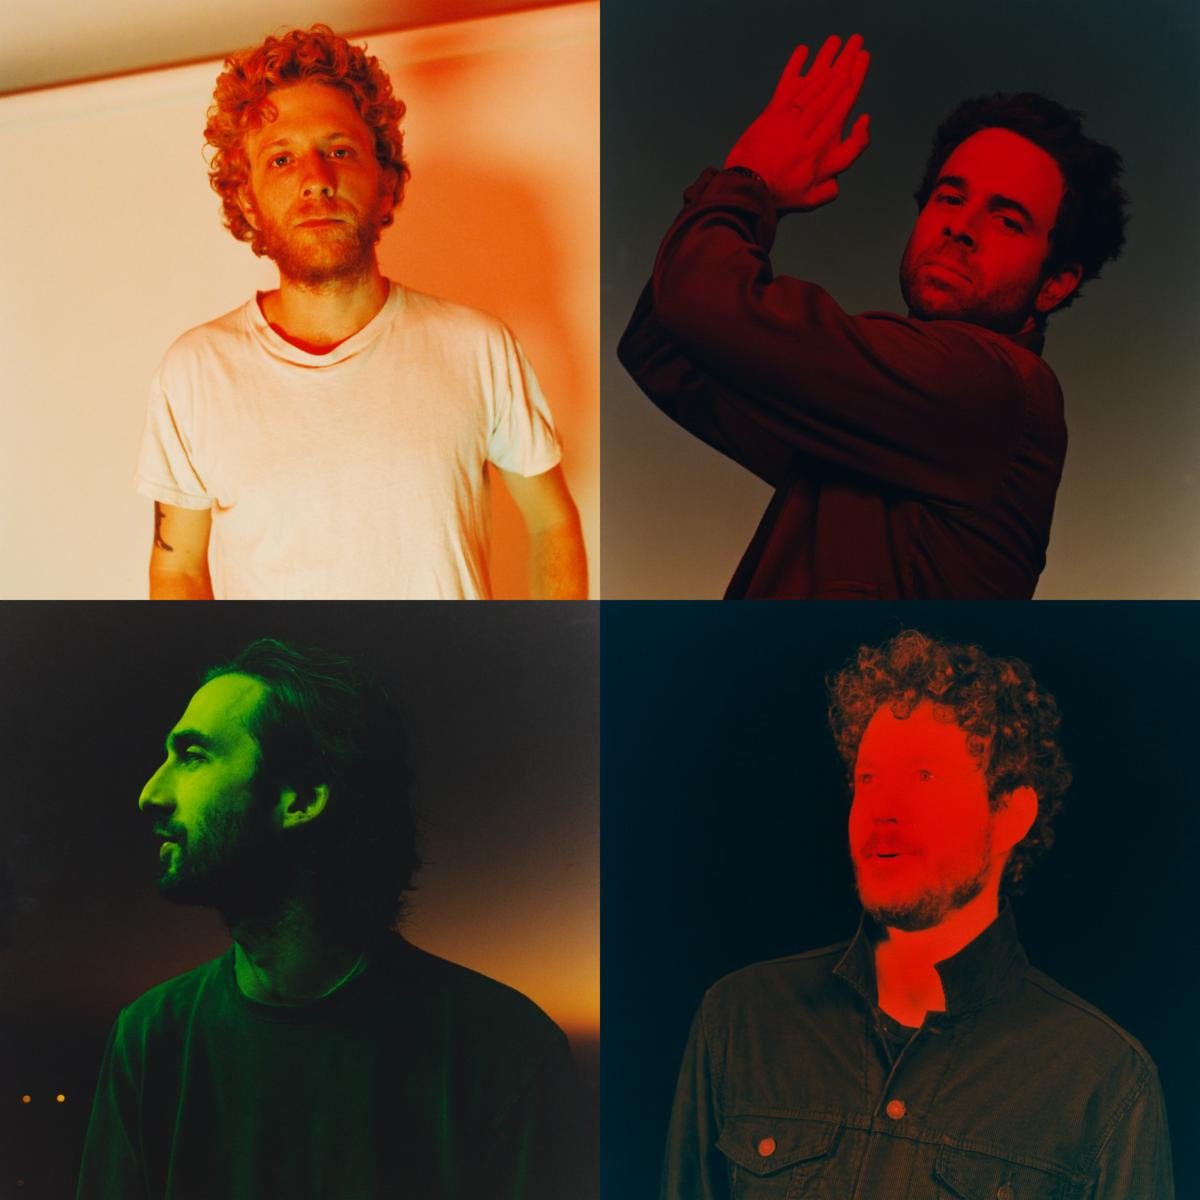 “St. Augustine at Night” by Dawes is Northern Transmissions Song of the Day. The track is off the band's forthcoming release Good Luck With Whatever